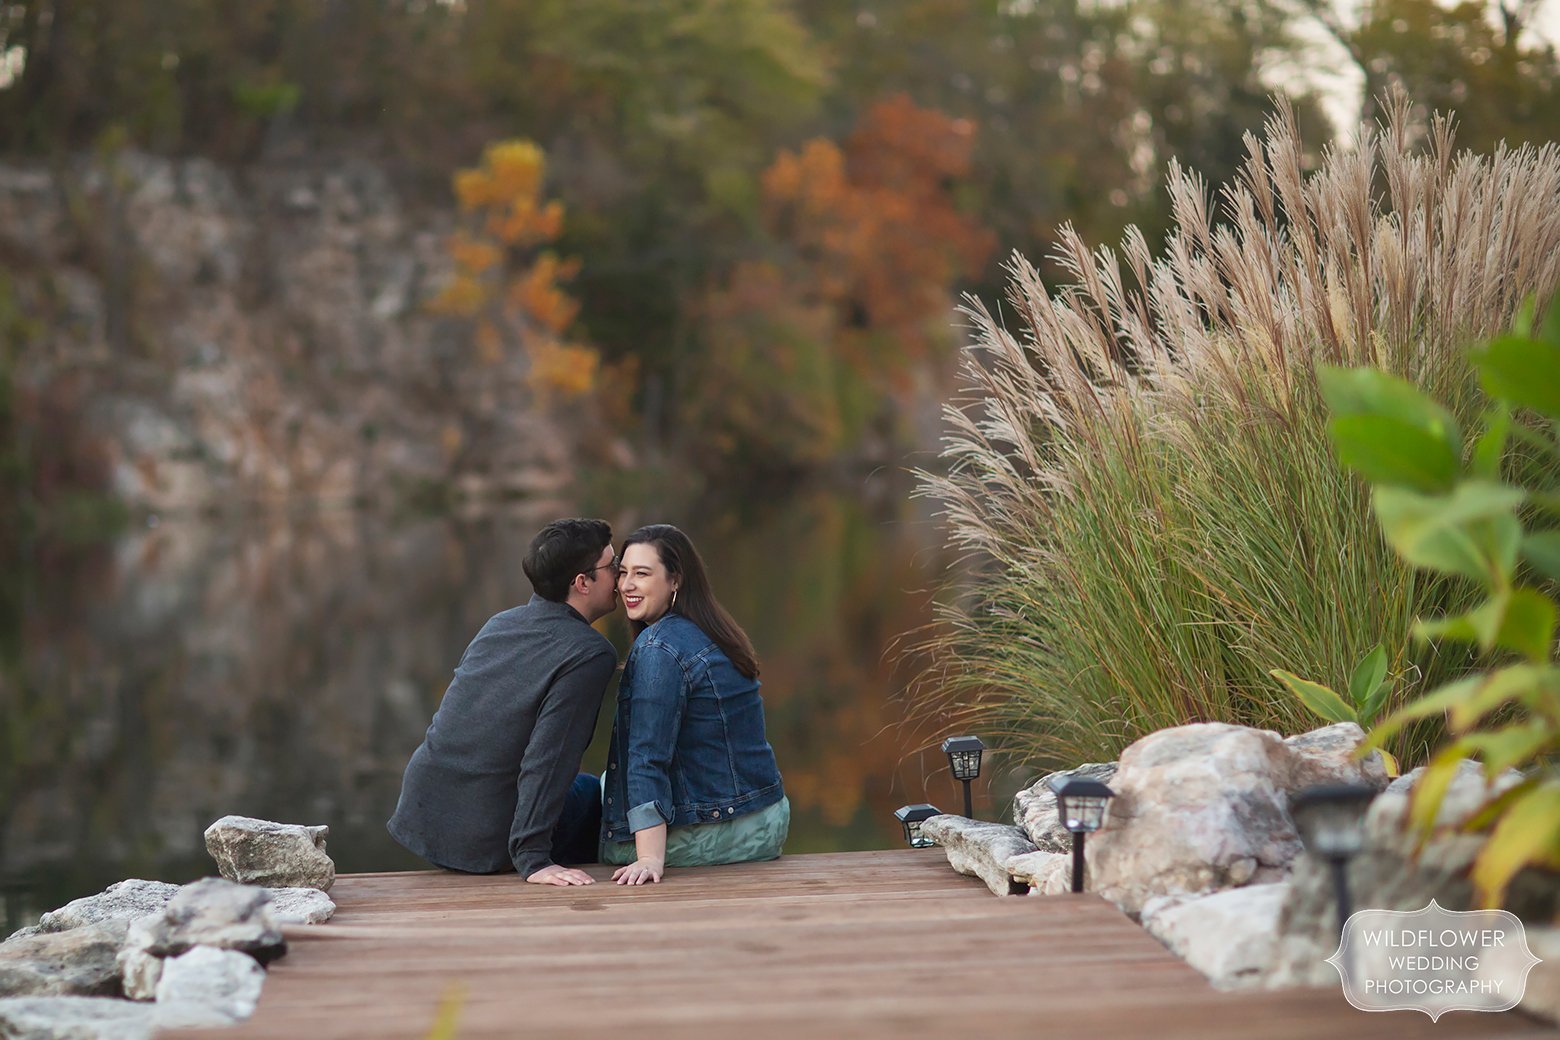 Wedding photographer at Wildcliff Venue capture engagement photos in the fall.